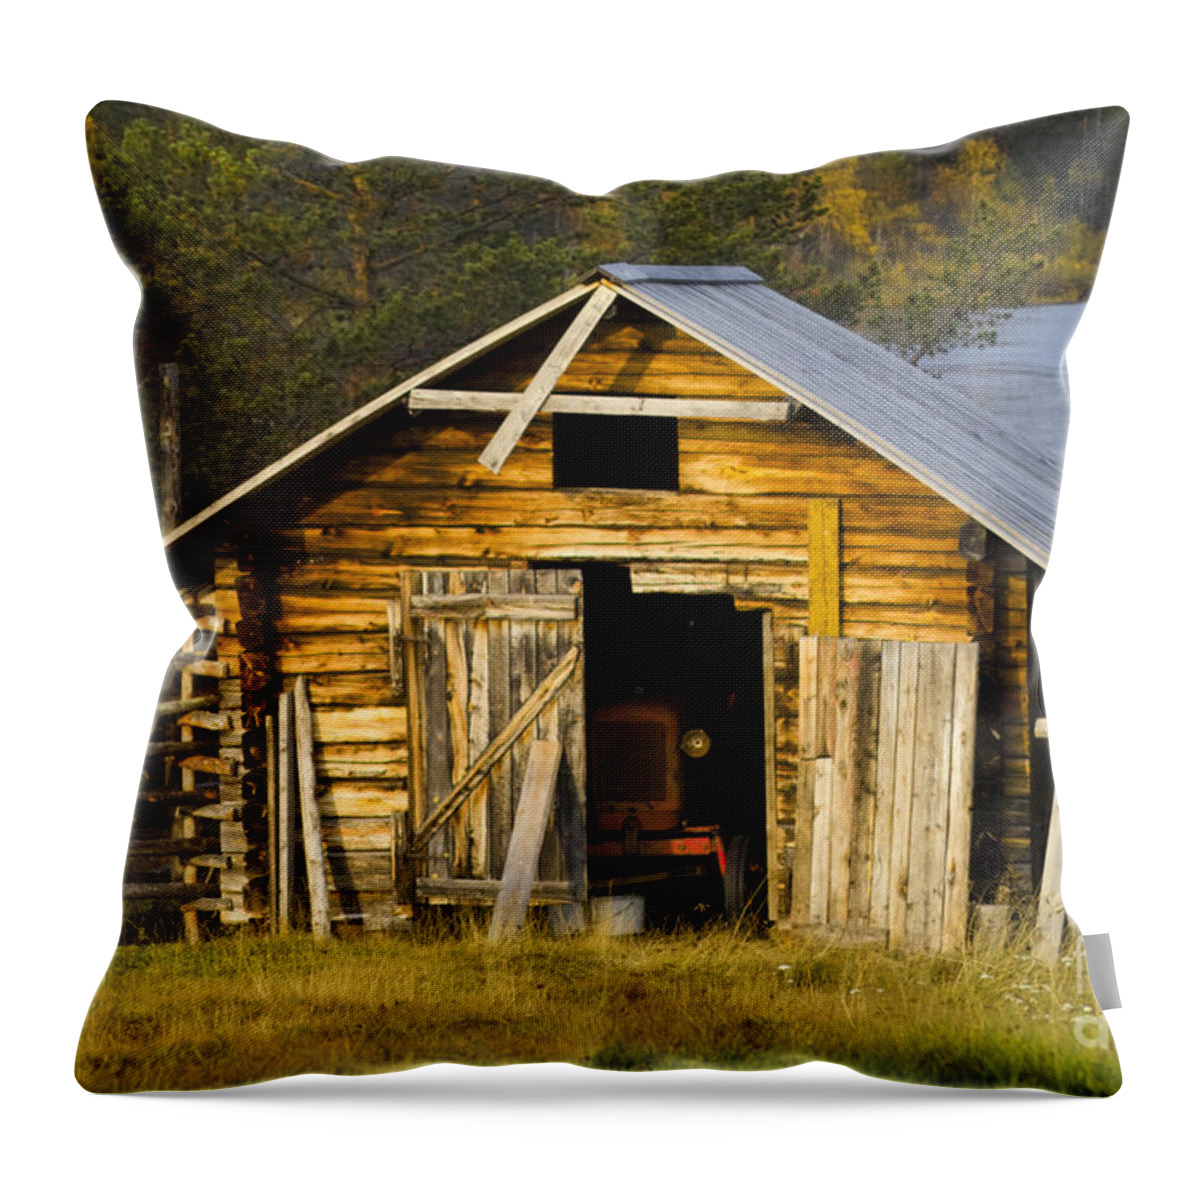 Heiko Throw Pillow featuring the photograph The Old Barn by Heiko Koehrer-Wagner